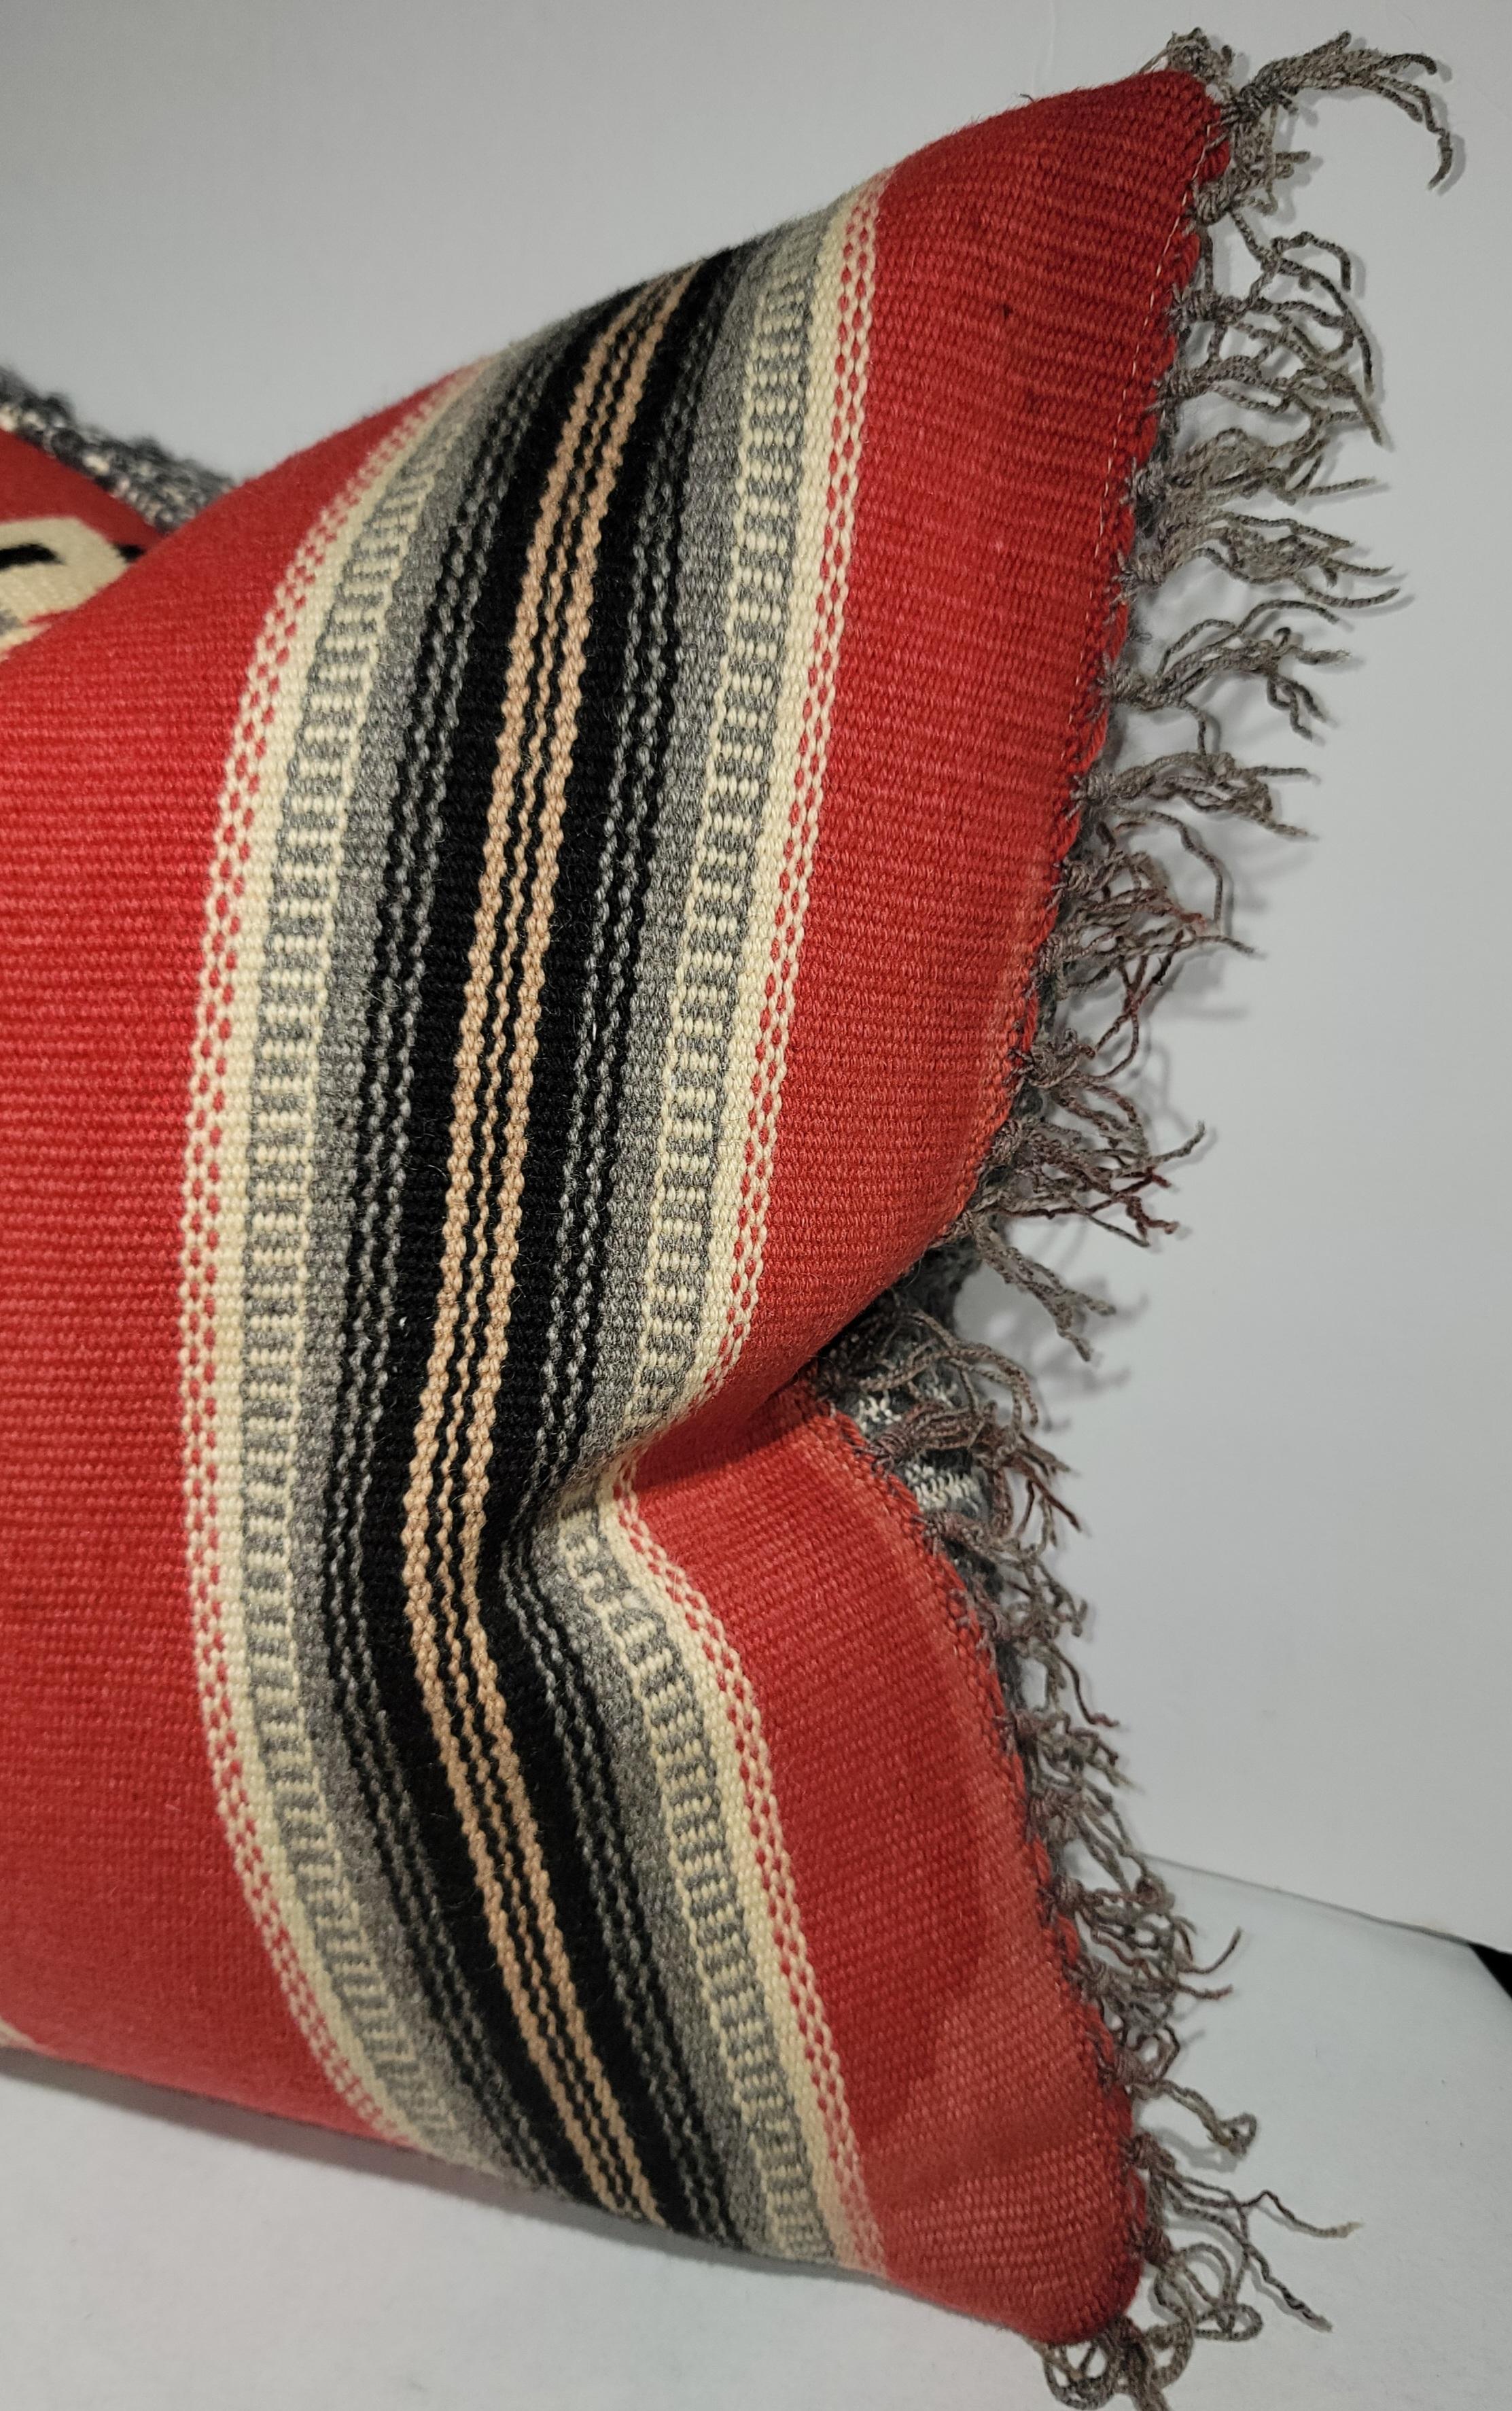 Mexican Indian Wool Serape Pillow with fringe and a wool backing. This All wool pillow has its bright side as well as its neutral side. The reds are highly visible with the grays, dark brown and white color pallet bringing the reds back to a subtle